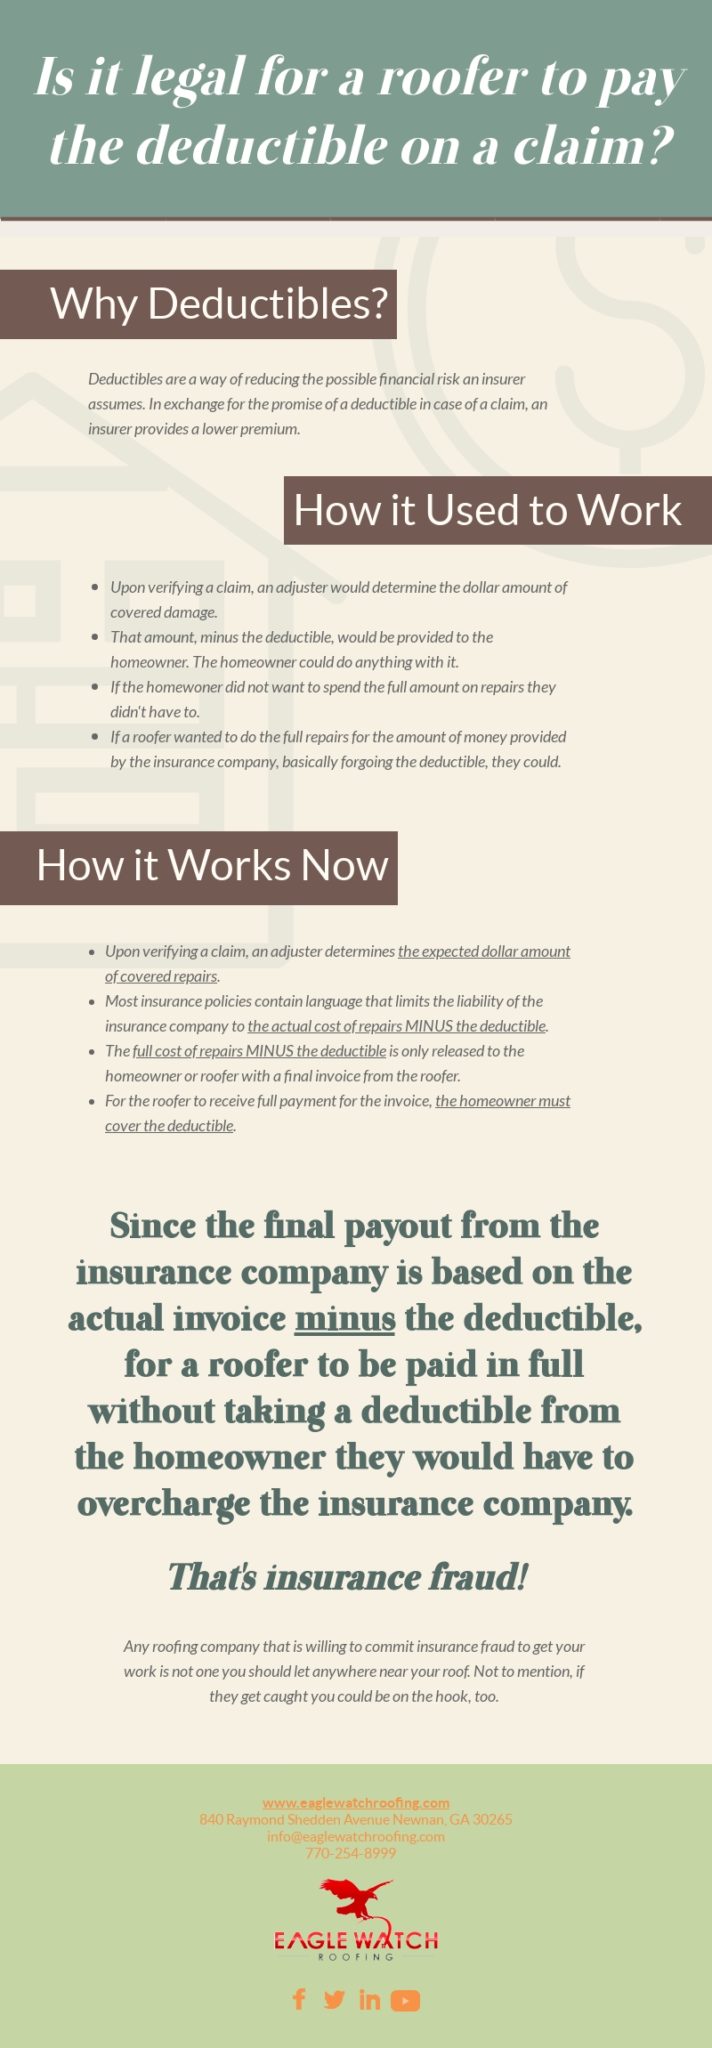 Is it Legal for a Roofer to Pay the Deductible on a Claim [infographic]